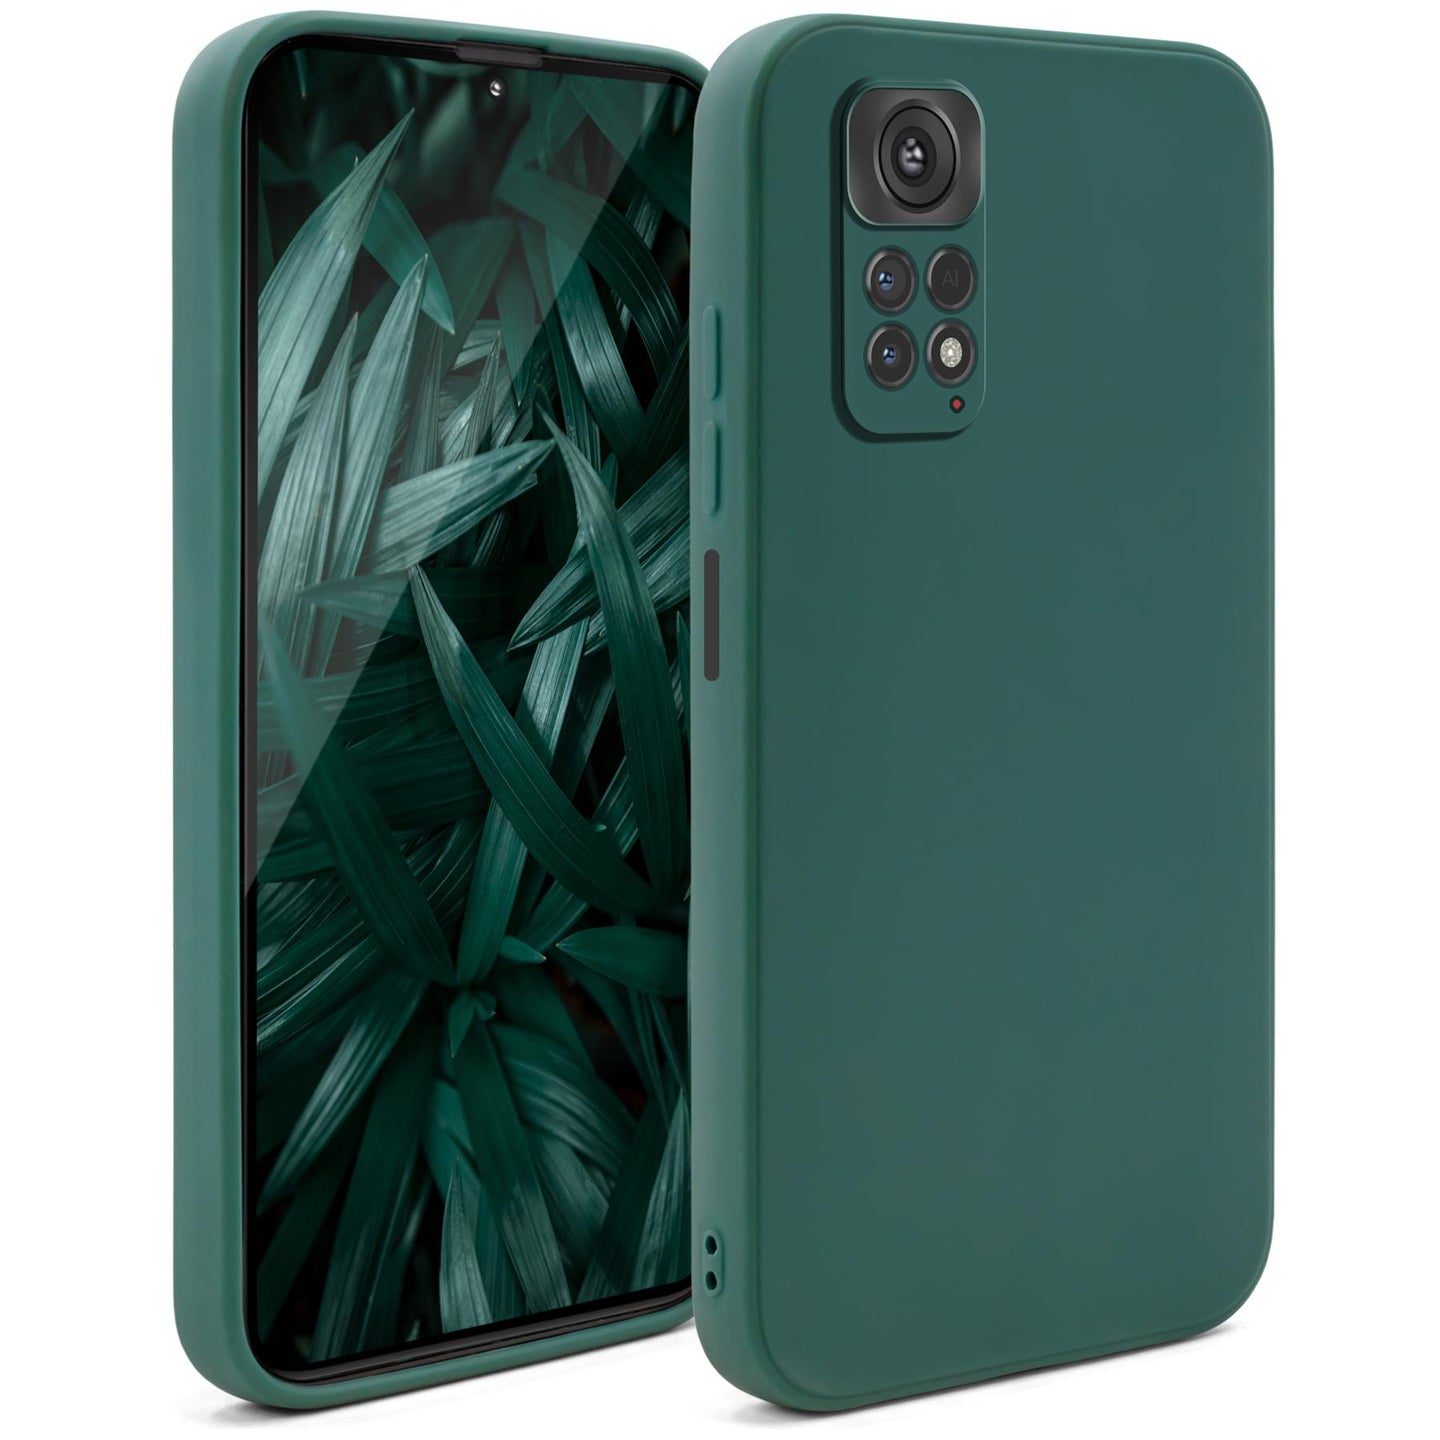 Moozy Minimalist Series Silicone Case for Xiaomi Redmi Note 11 / 11S, Dark Green - Matte Finish Lightweight Mobile Phone Case Slim Soft Protective TPU Cover with Matte Surface